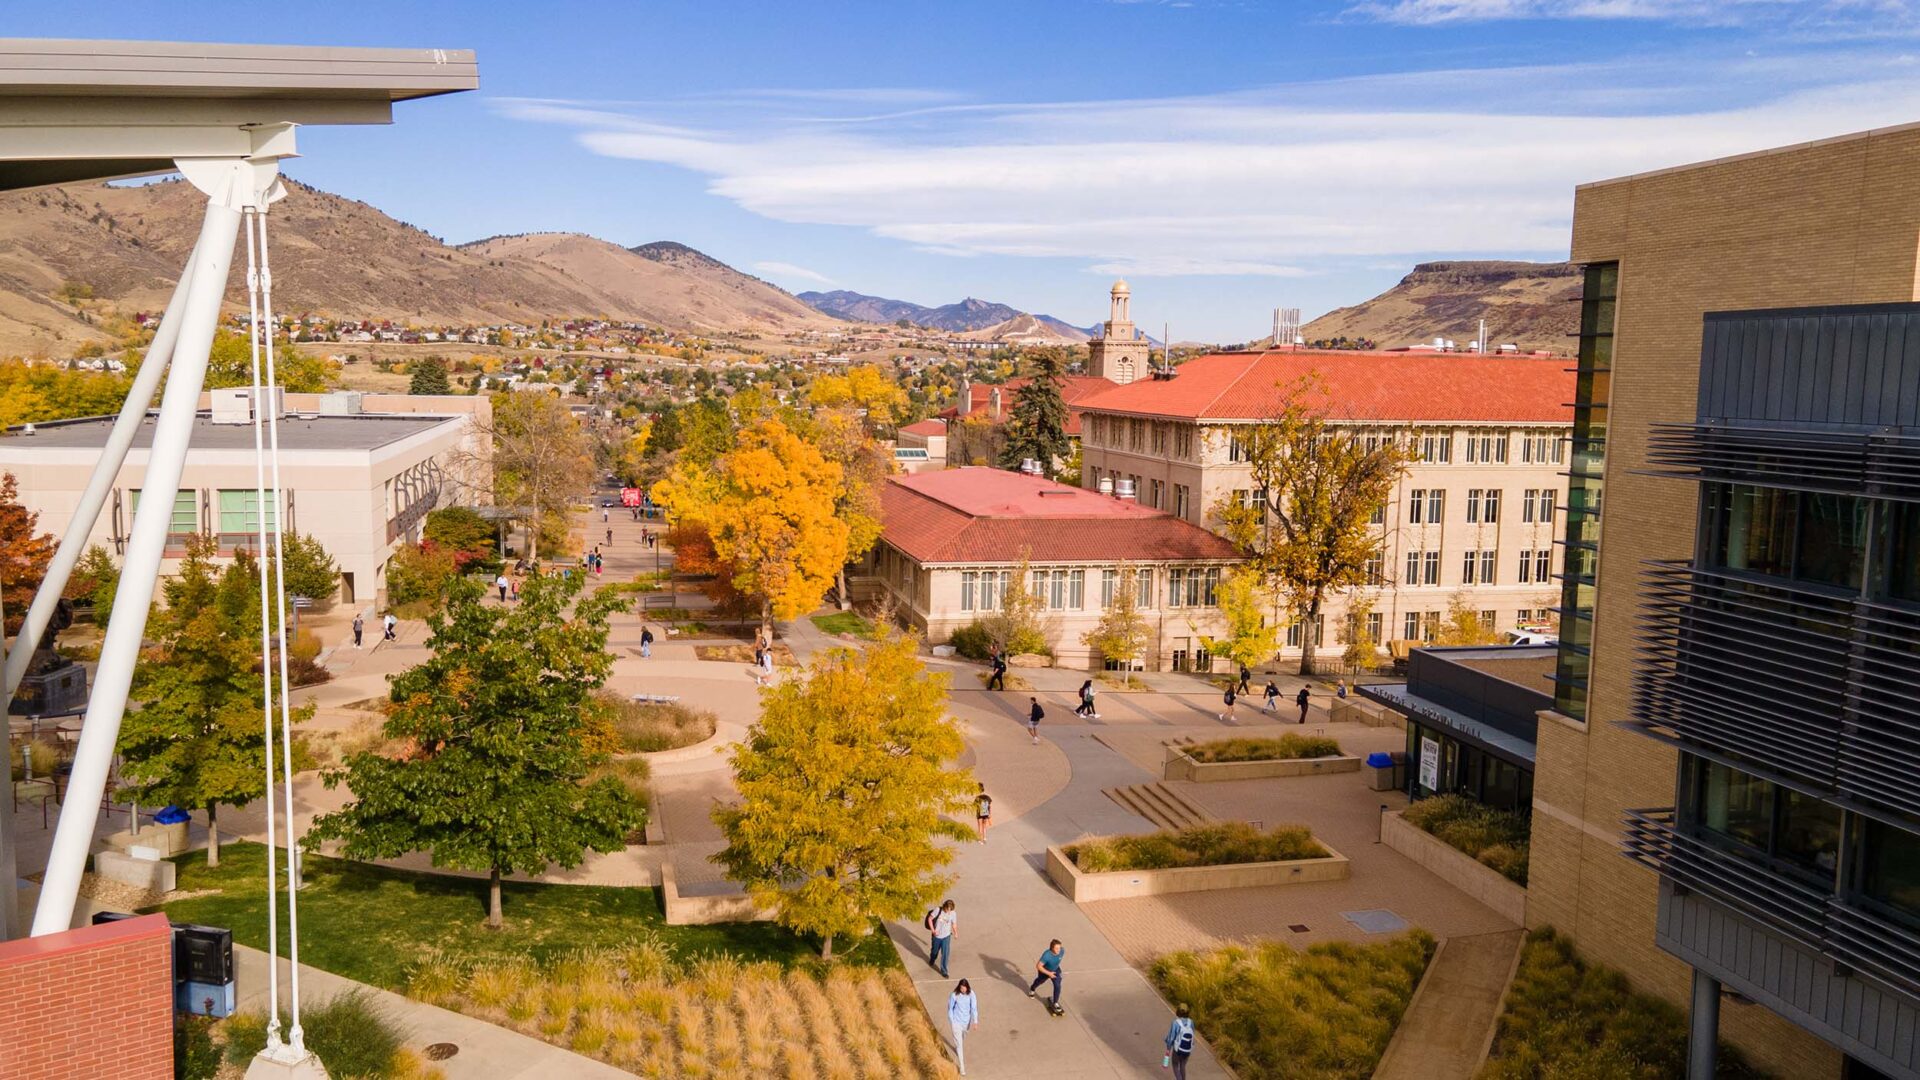 Colorado School of Mines to upgrade parking garage with APGS